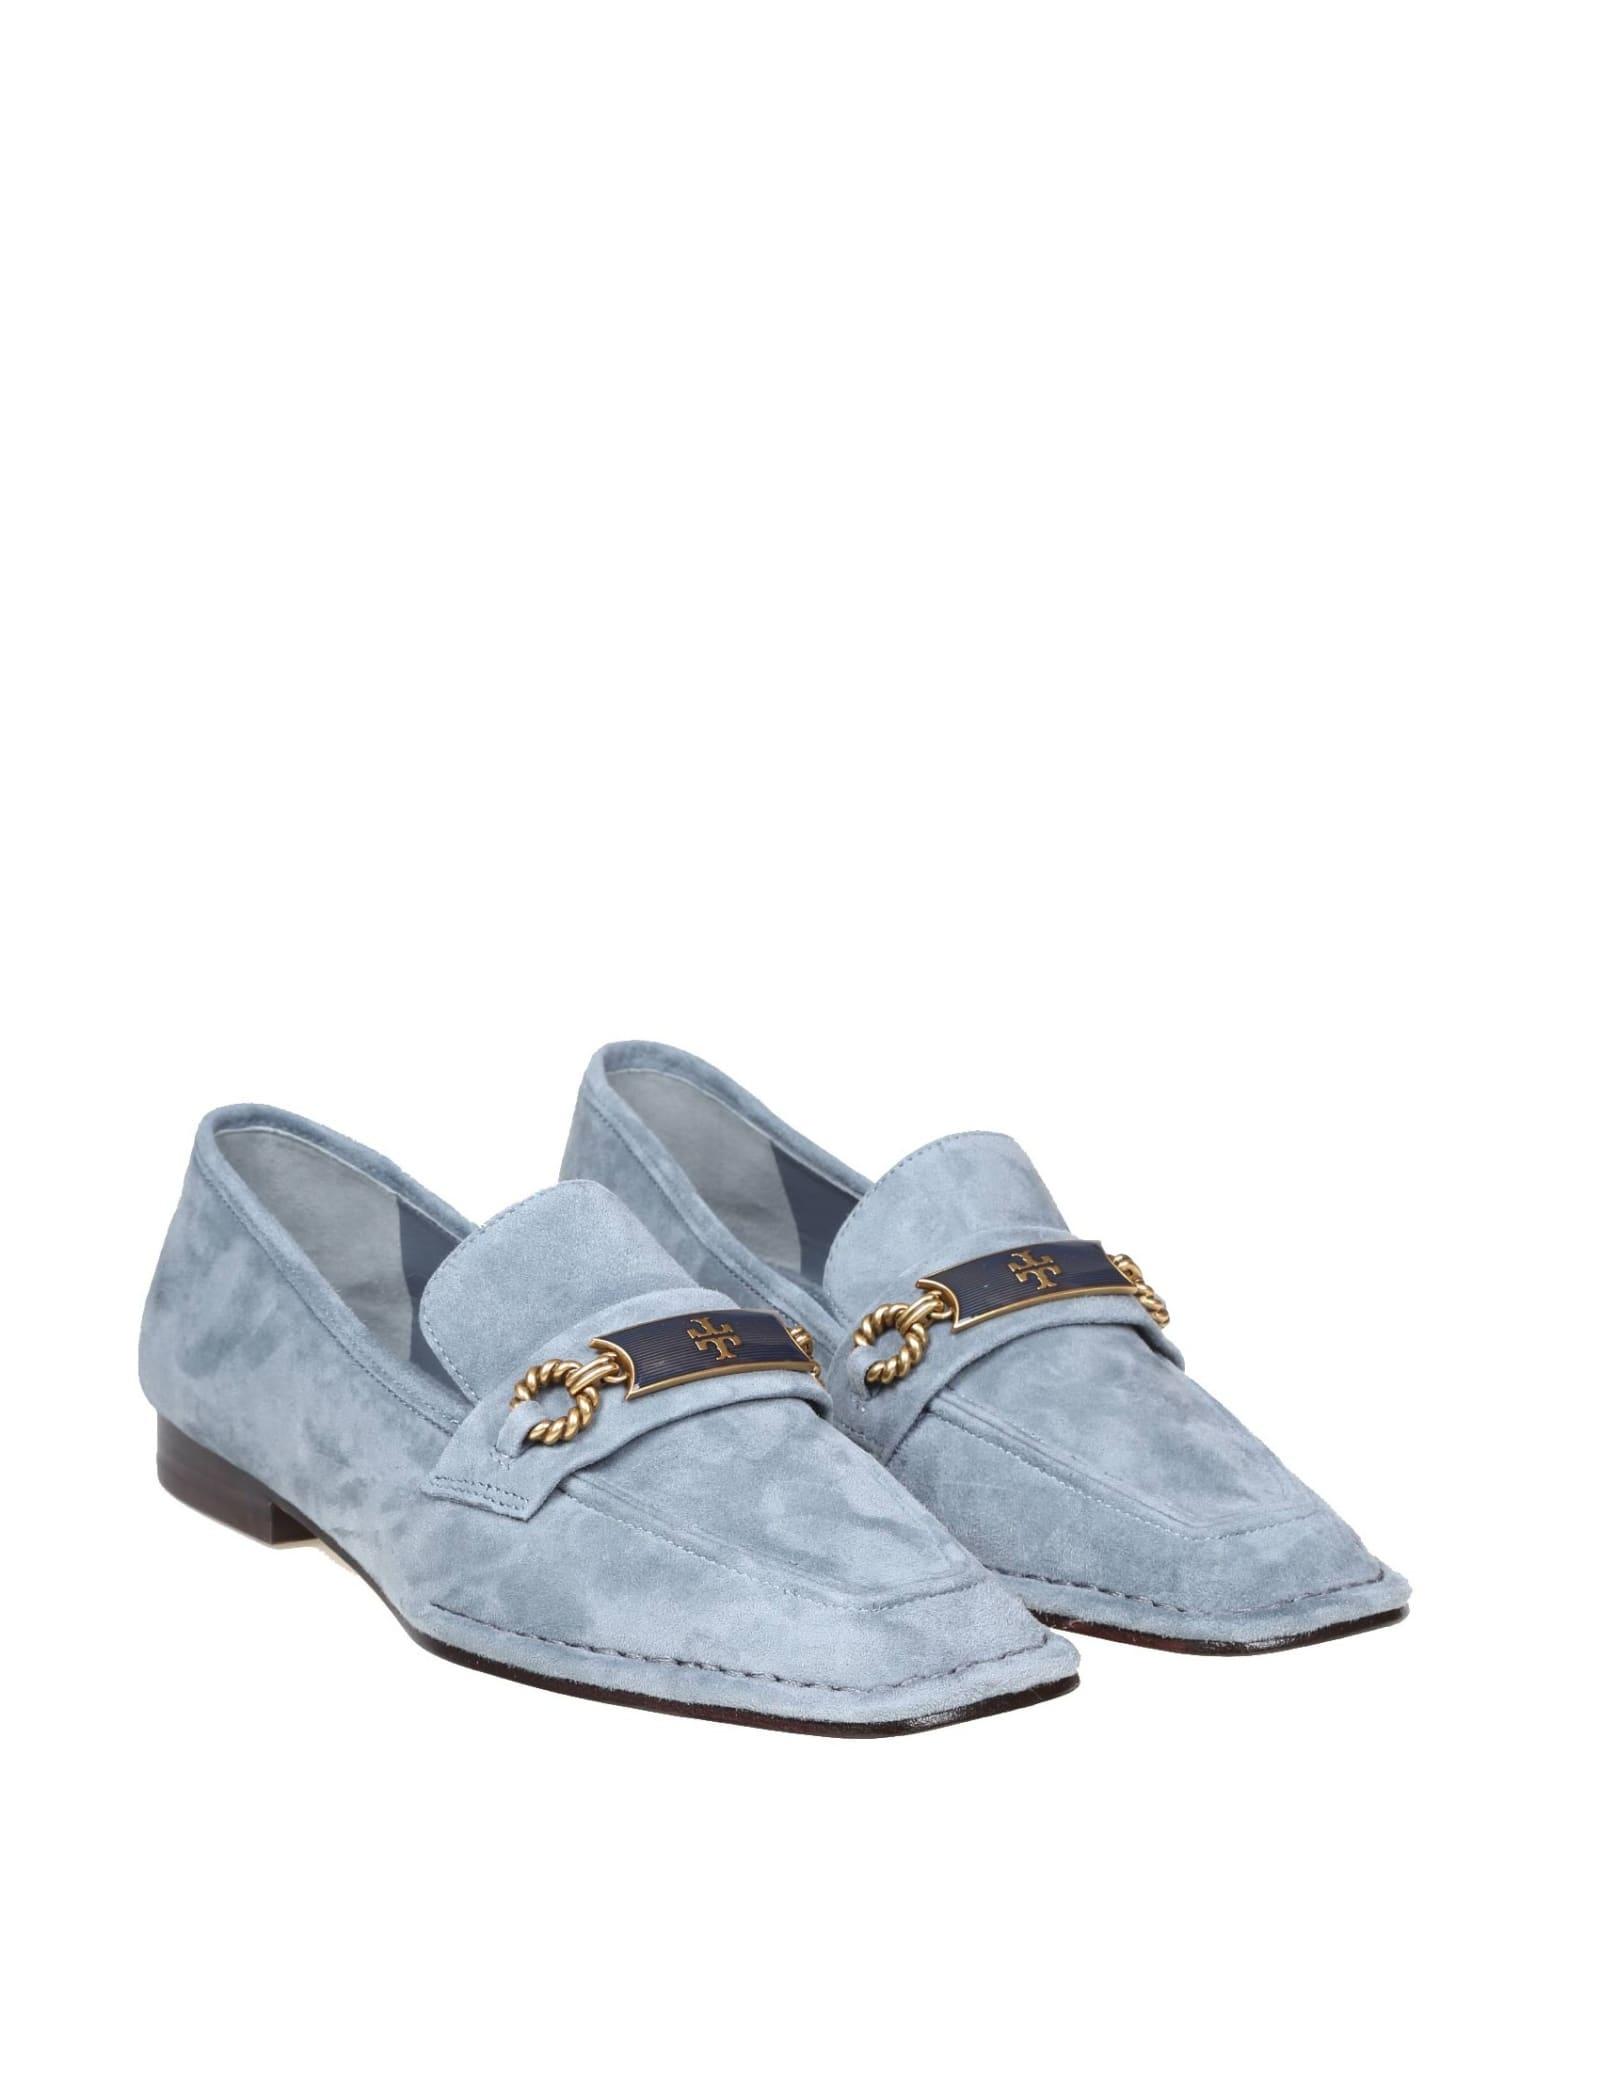 Tory Burch Perrine Loafer In Light Blue Suede | Lyst